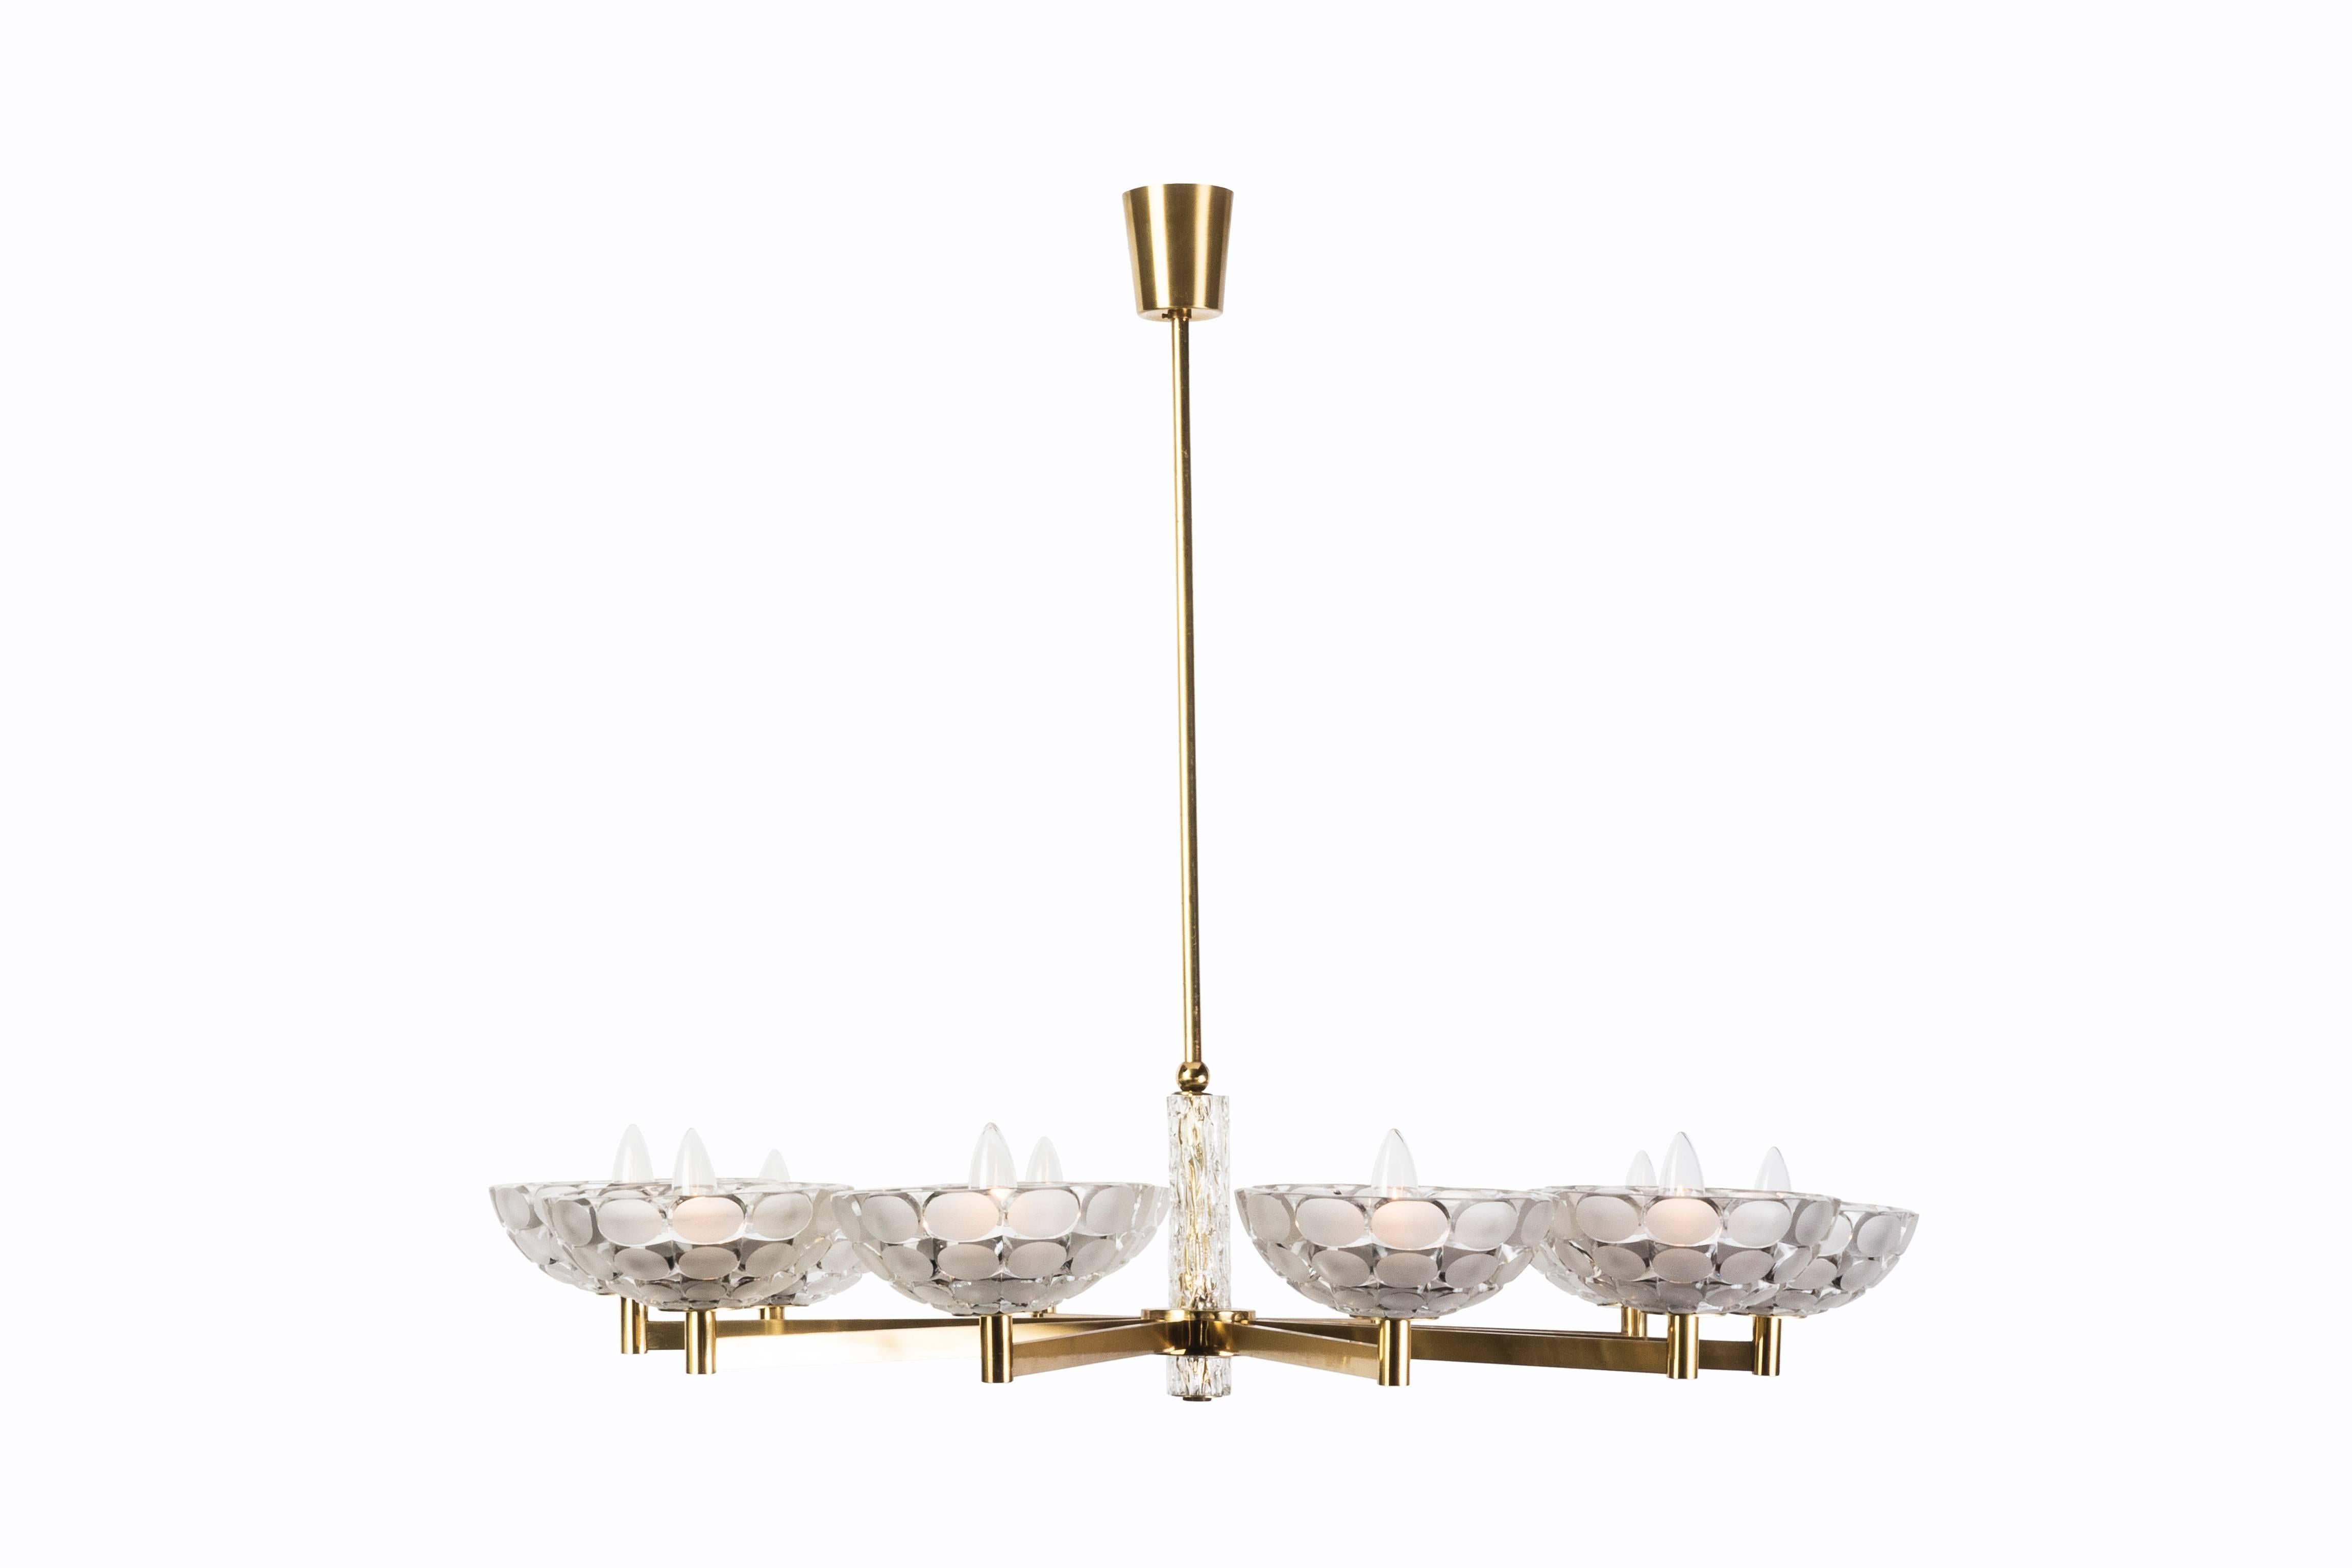 This gorgeous Austrian chandelier was executed by Kalmar and features a brass frame with frosted tubular glass detailing and ten relief frosted glass sconces with cut-outs in a frosted.

Made in Austria, circa 1950.

Measures: 38 3/4